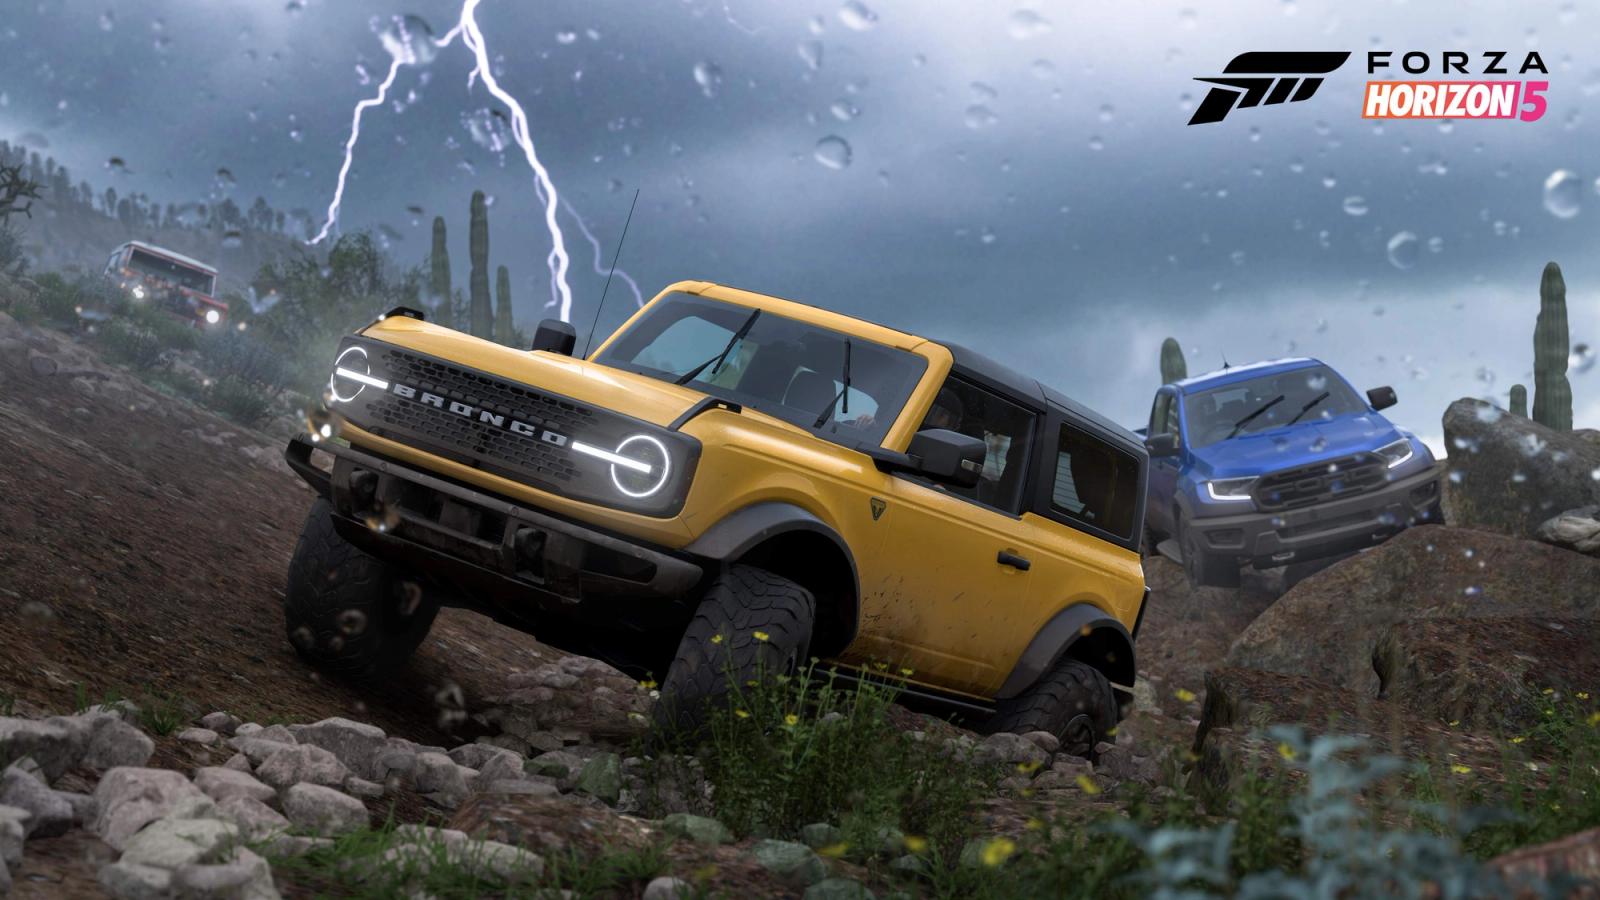 A yellow Ford Bronco drives across a dirt track towards the camera as a blue car is in pursuit. Lightning flashes in the background